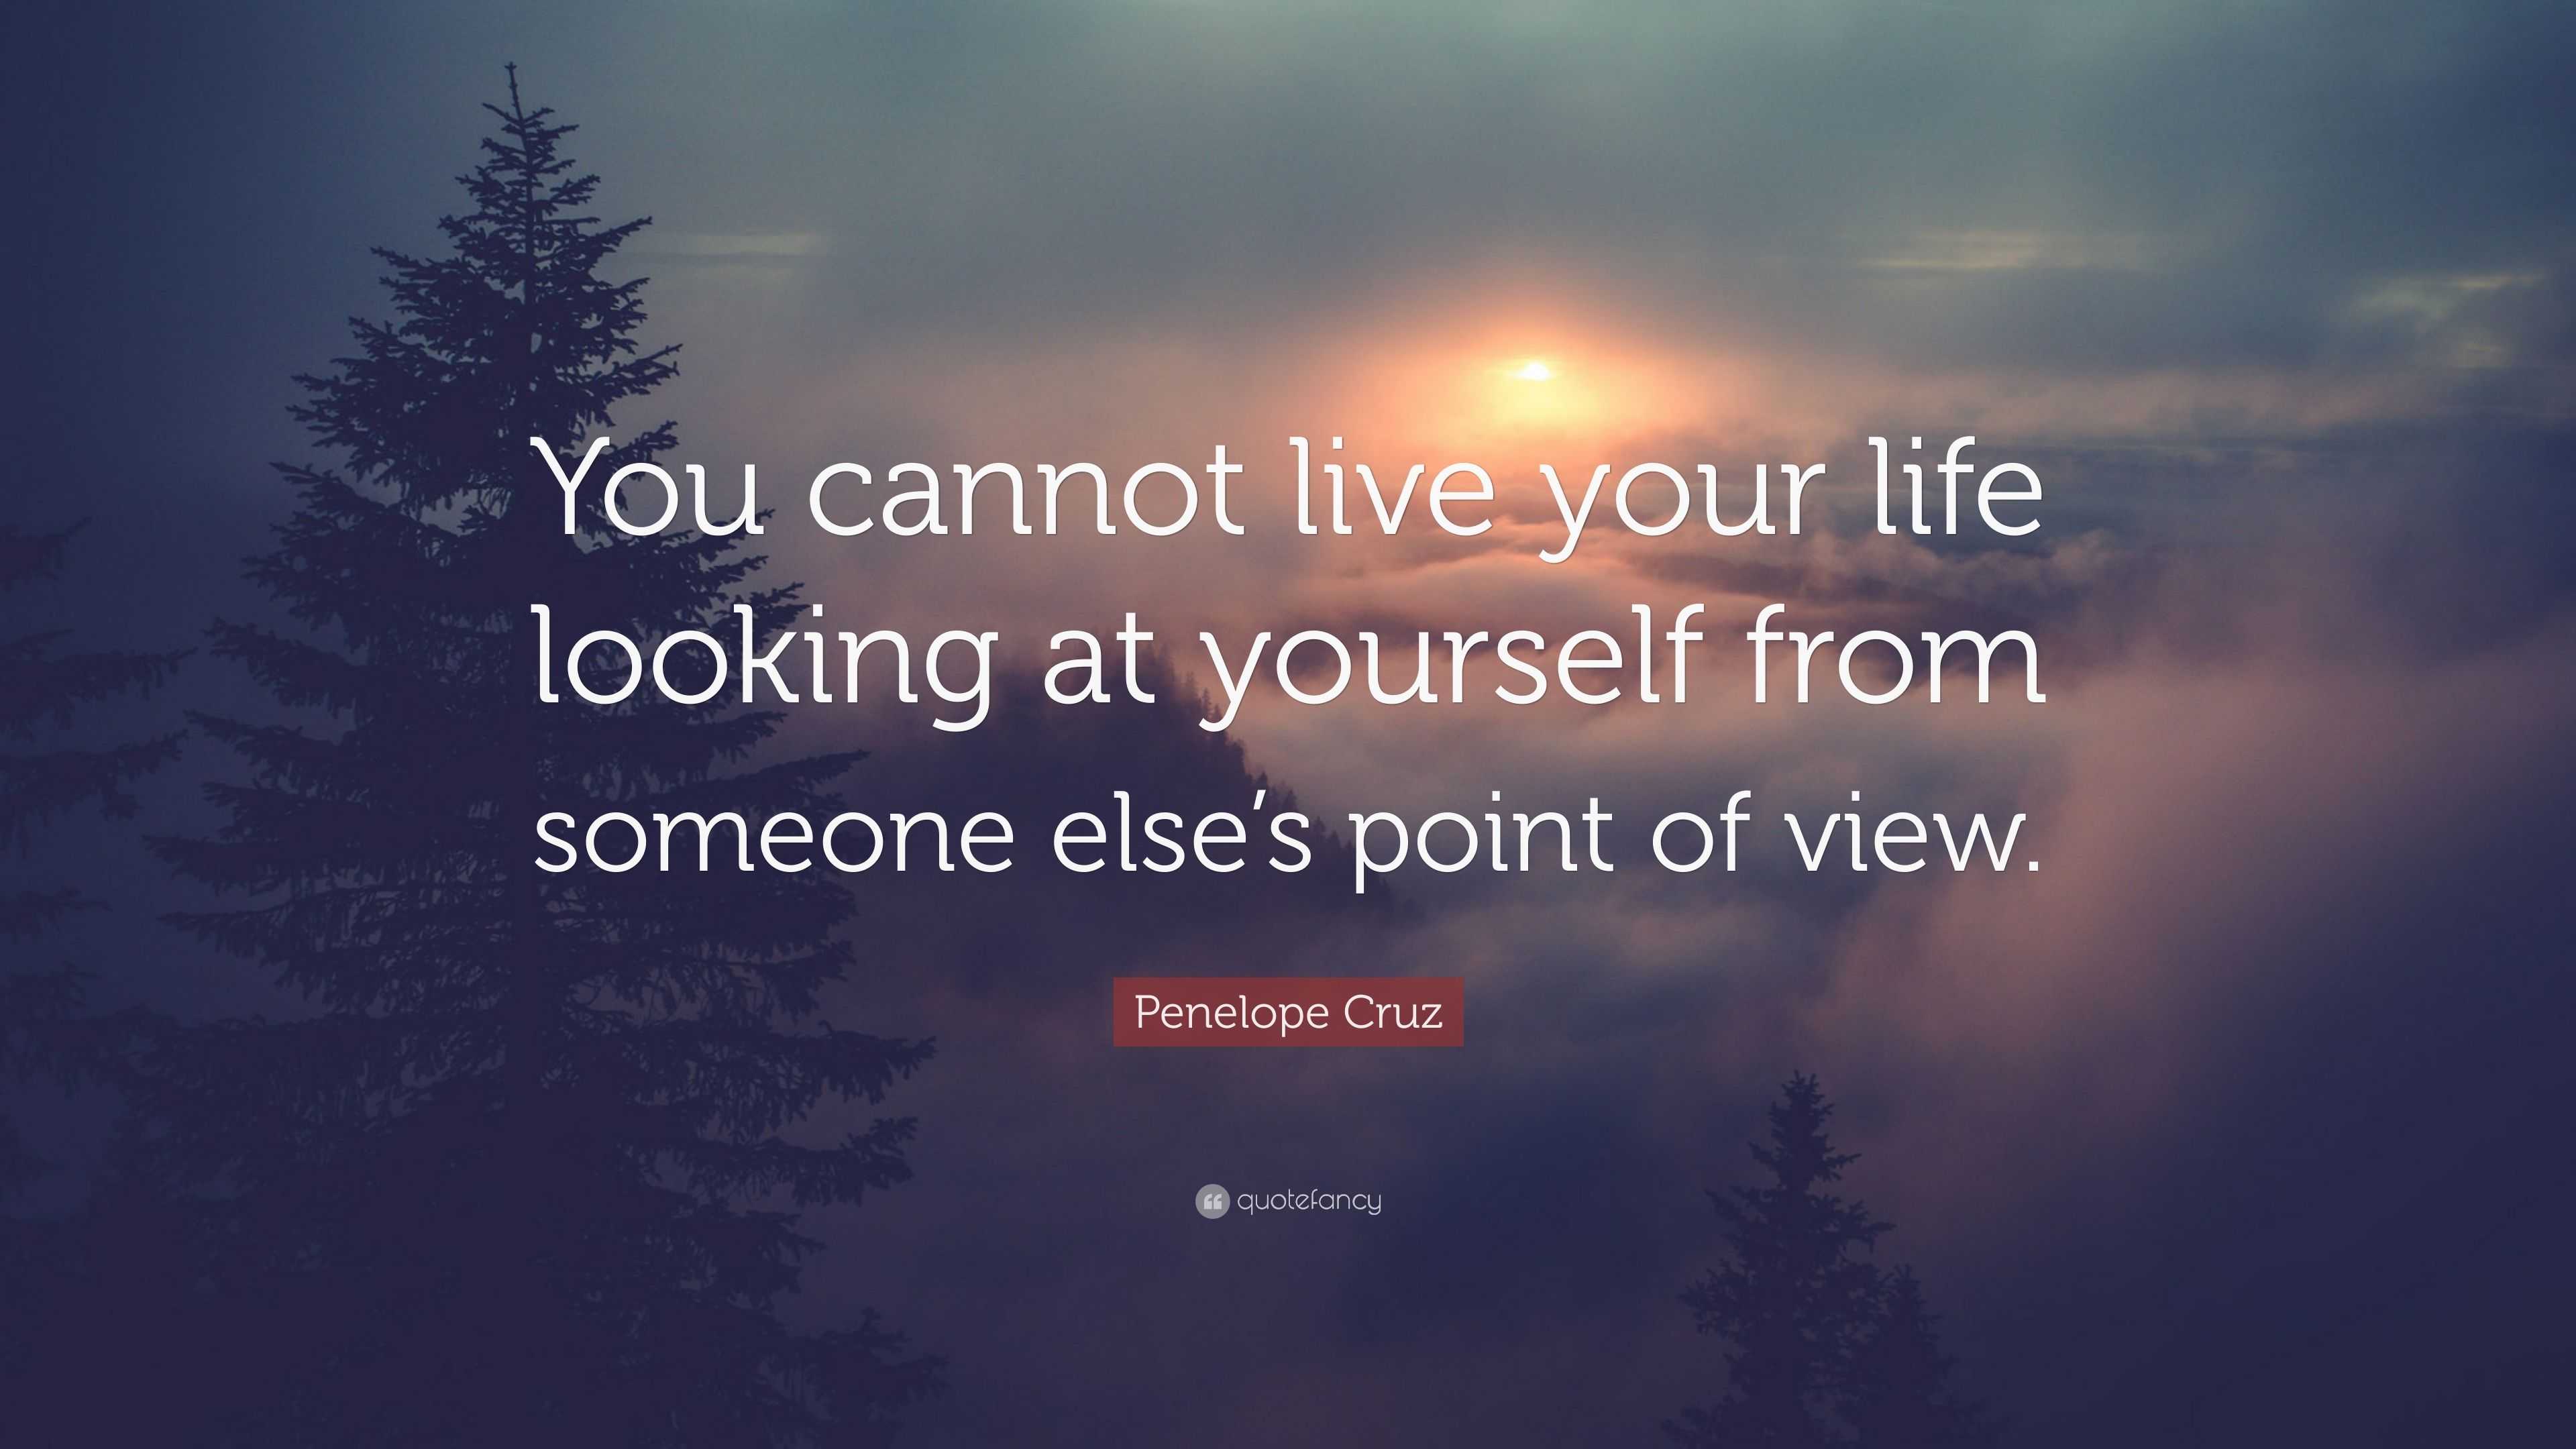 Penelope Cruz Quote: “You cannot live your life looking at yourself ...